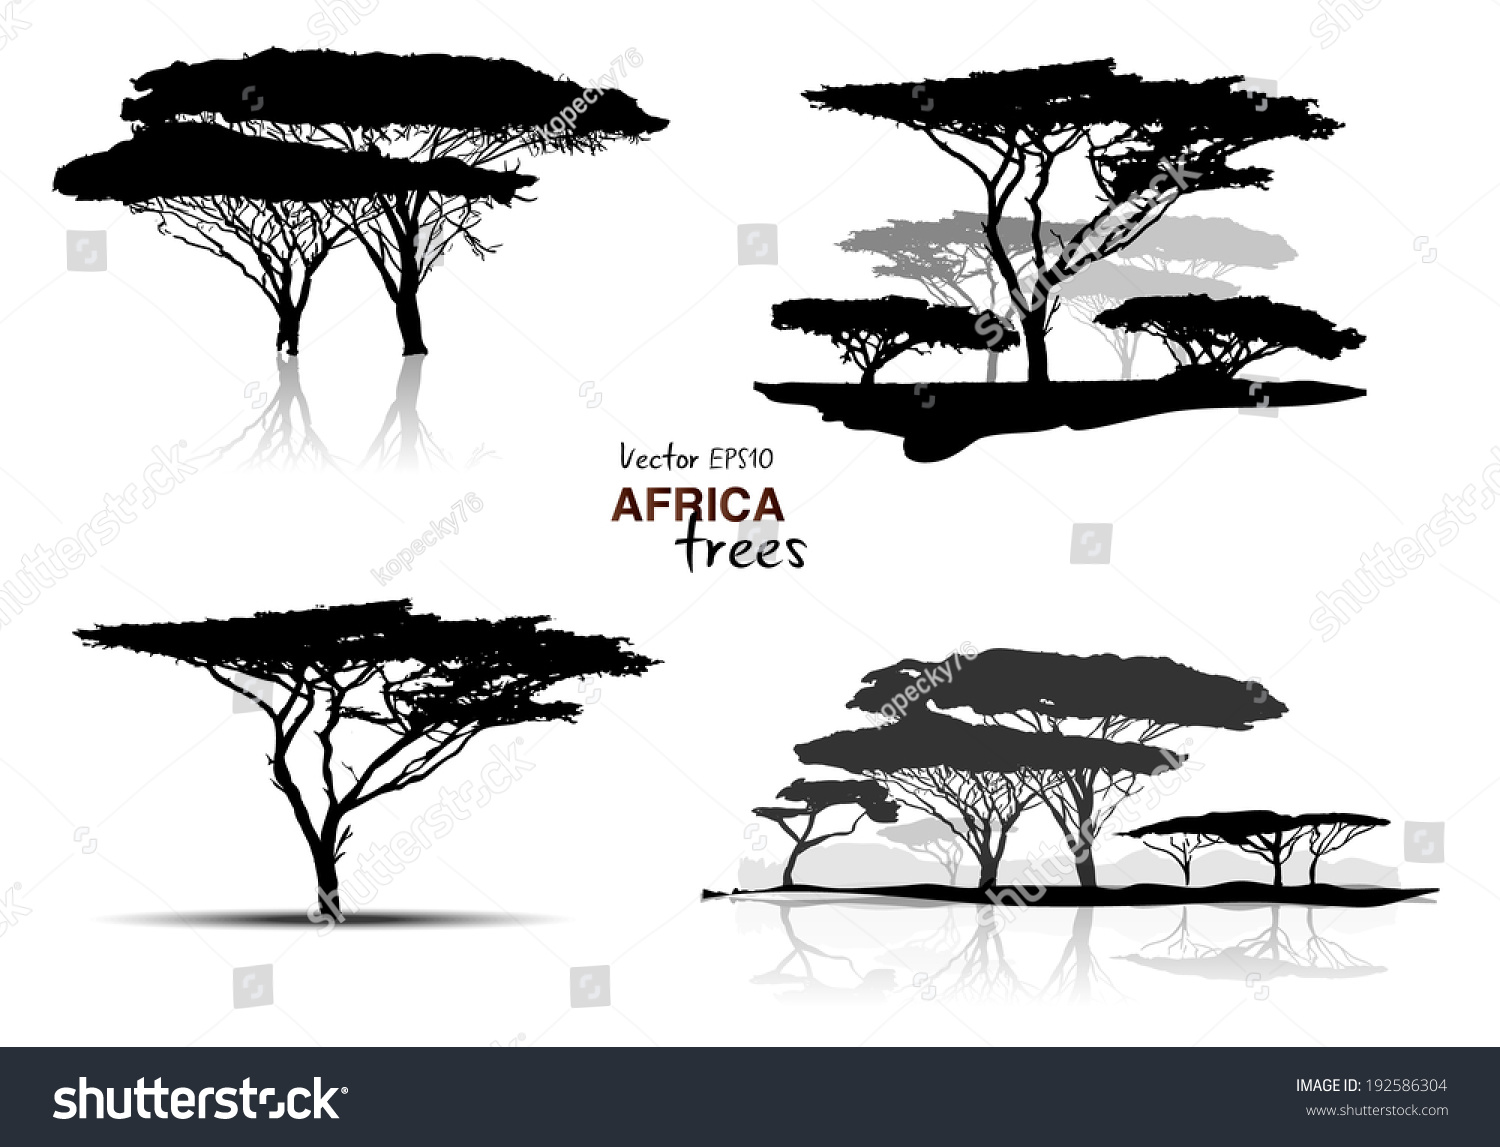 SVG of Silhouette of africa trees black on white background, vector illustration svg